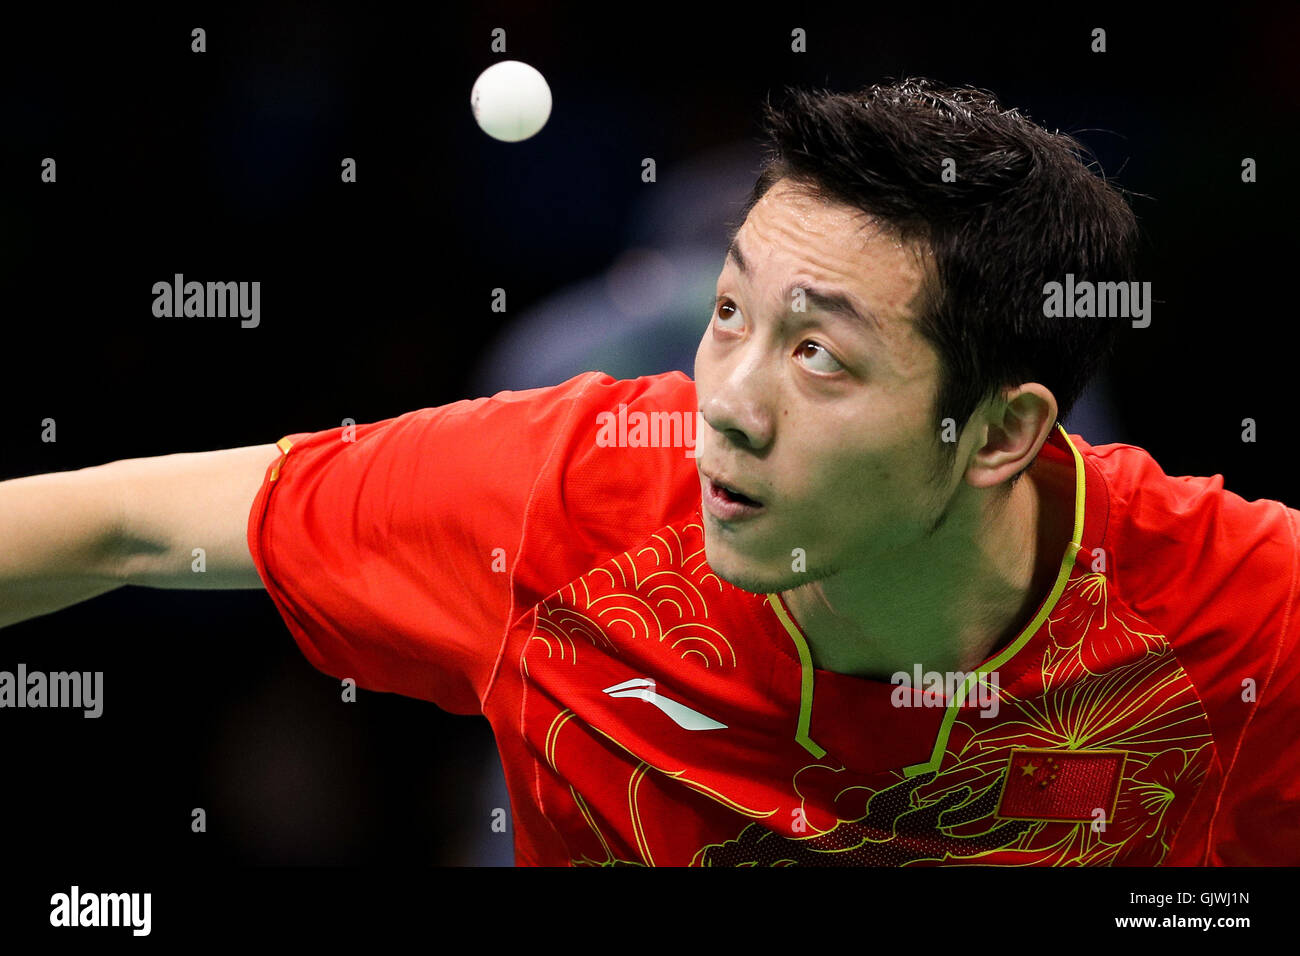 Rio de Janeiro, Brazil. 17th Aug, 2016. OLYMPICS 2016 TABLE TENNIS - XU Xin (CHN) at end of table tennis by teams from Rio 2016 Olympics between China and Japan, held in Pavilion 3 of Riocentro. Credit:  Foto Arena LTDA/Alamy Live News Stock Photo